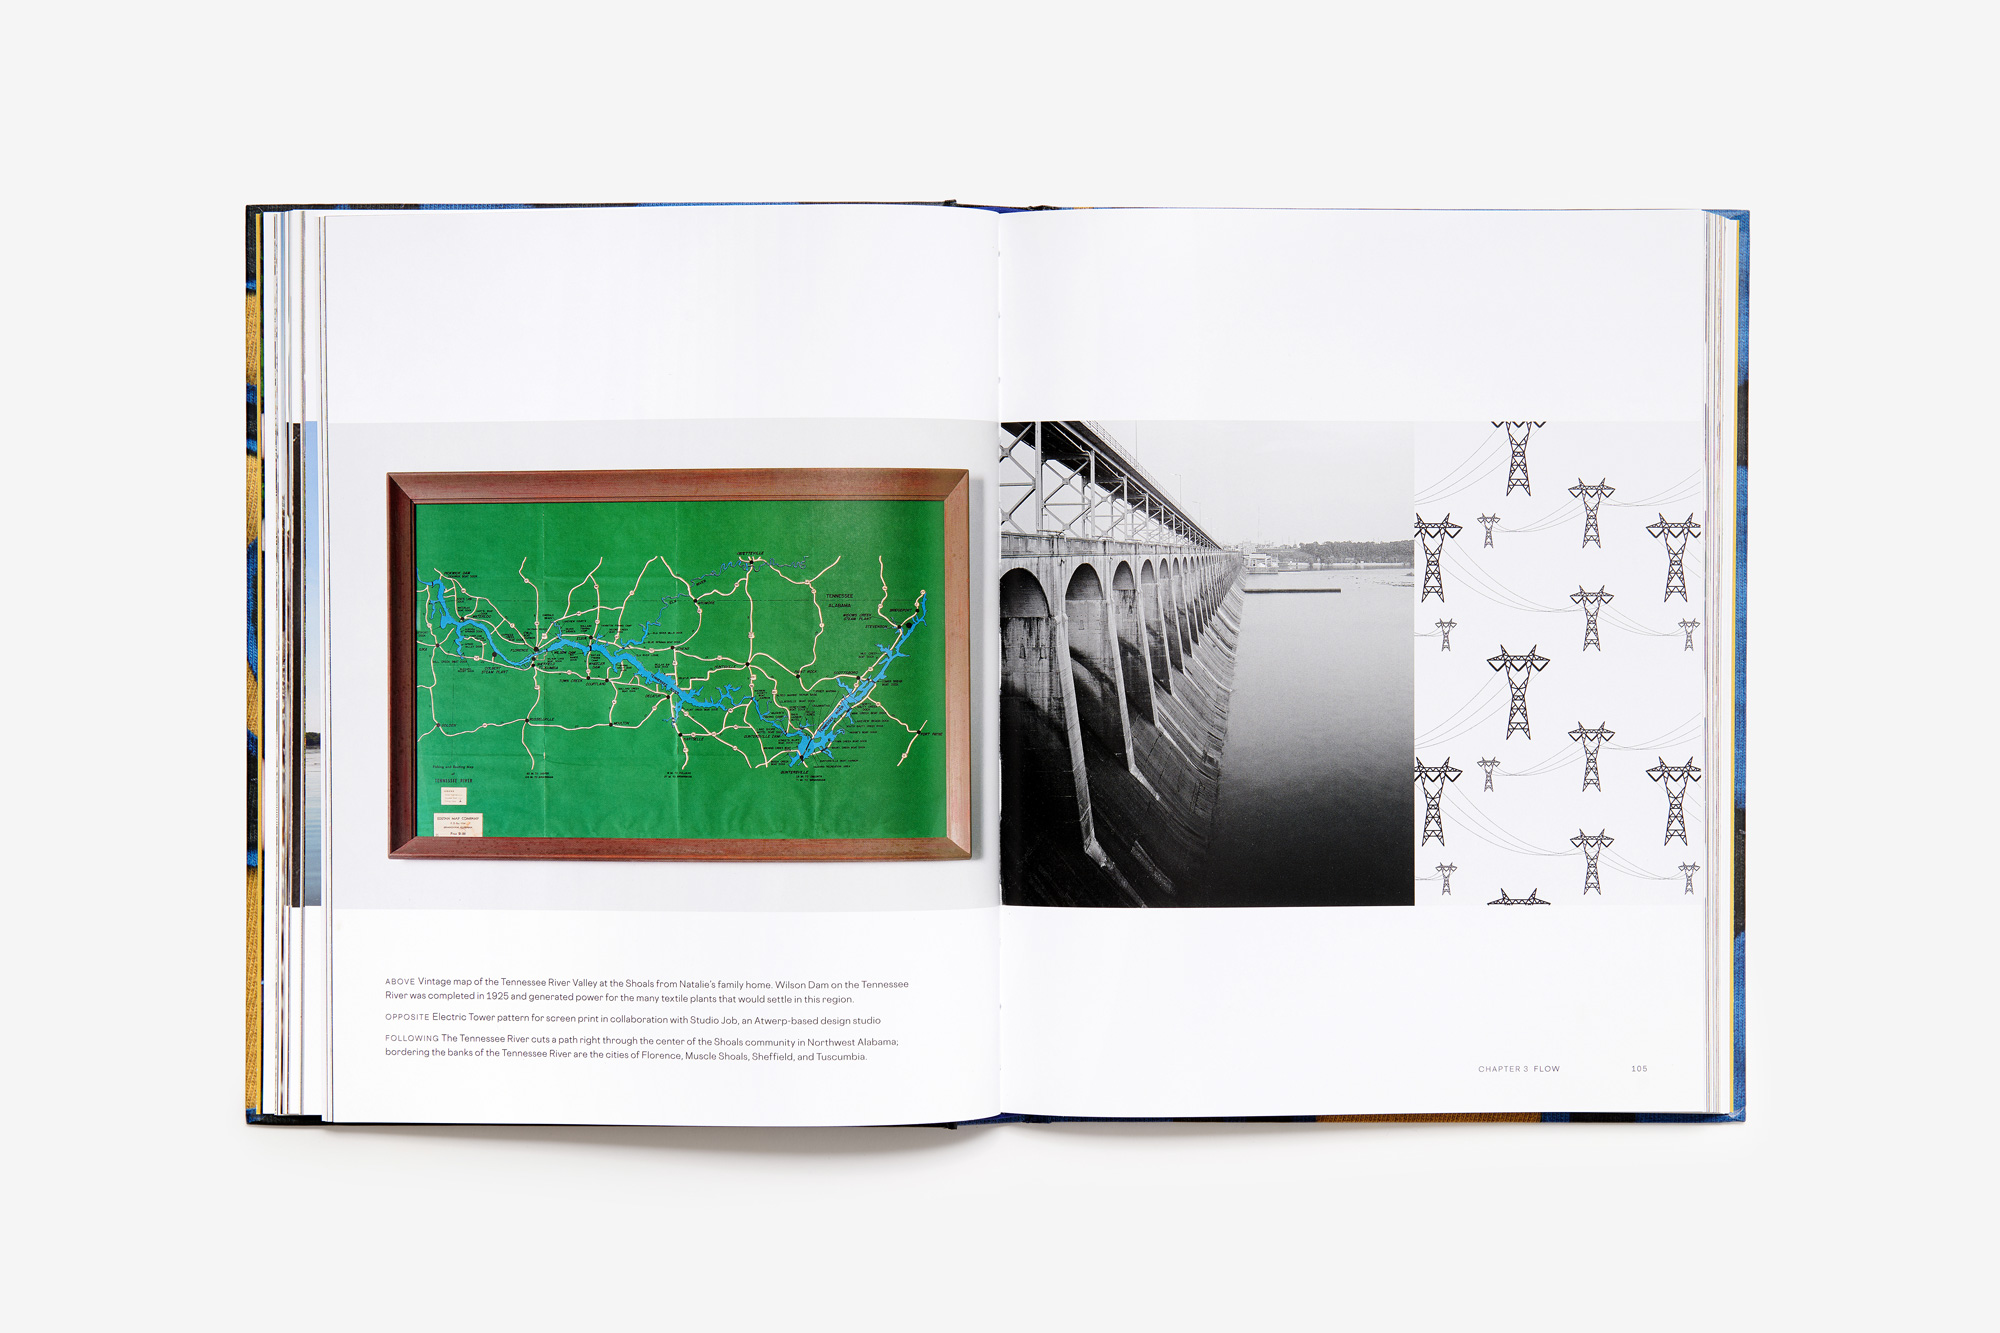 Open book with photographs of a map, a dam, and a design featuring electrical towers.